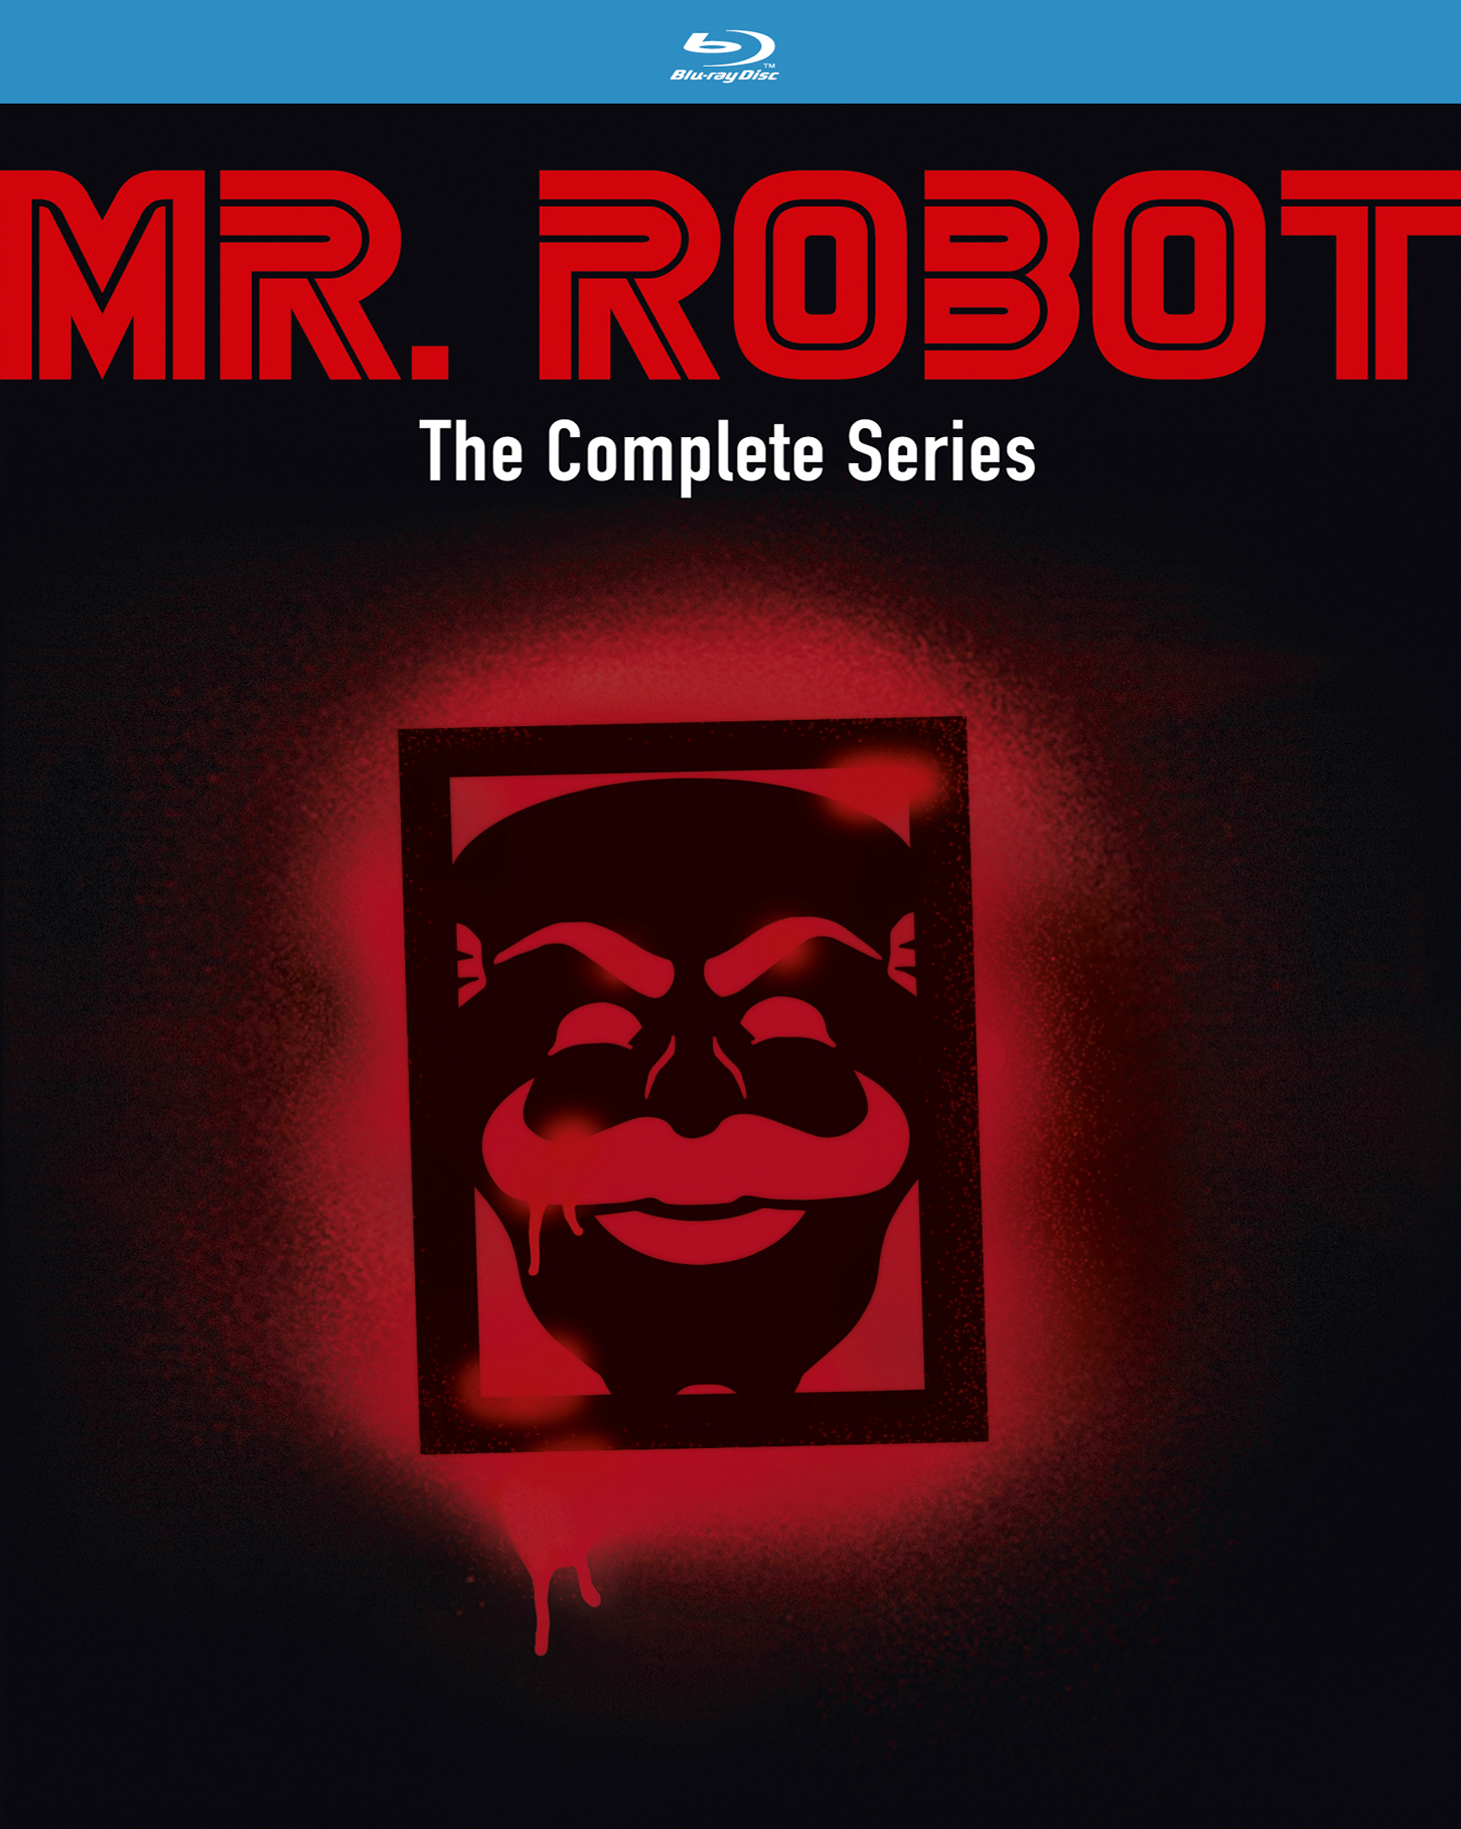 Mr. Robot: The Complete Series [Blu-ray] - Best Buy